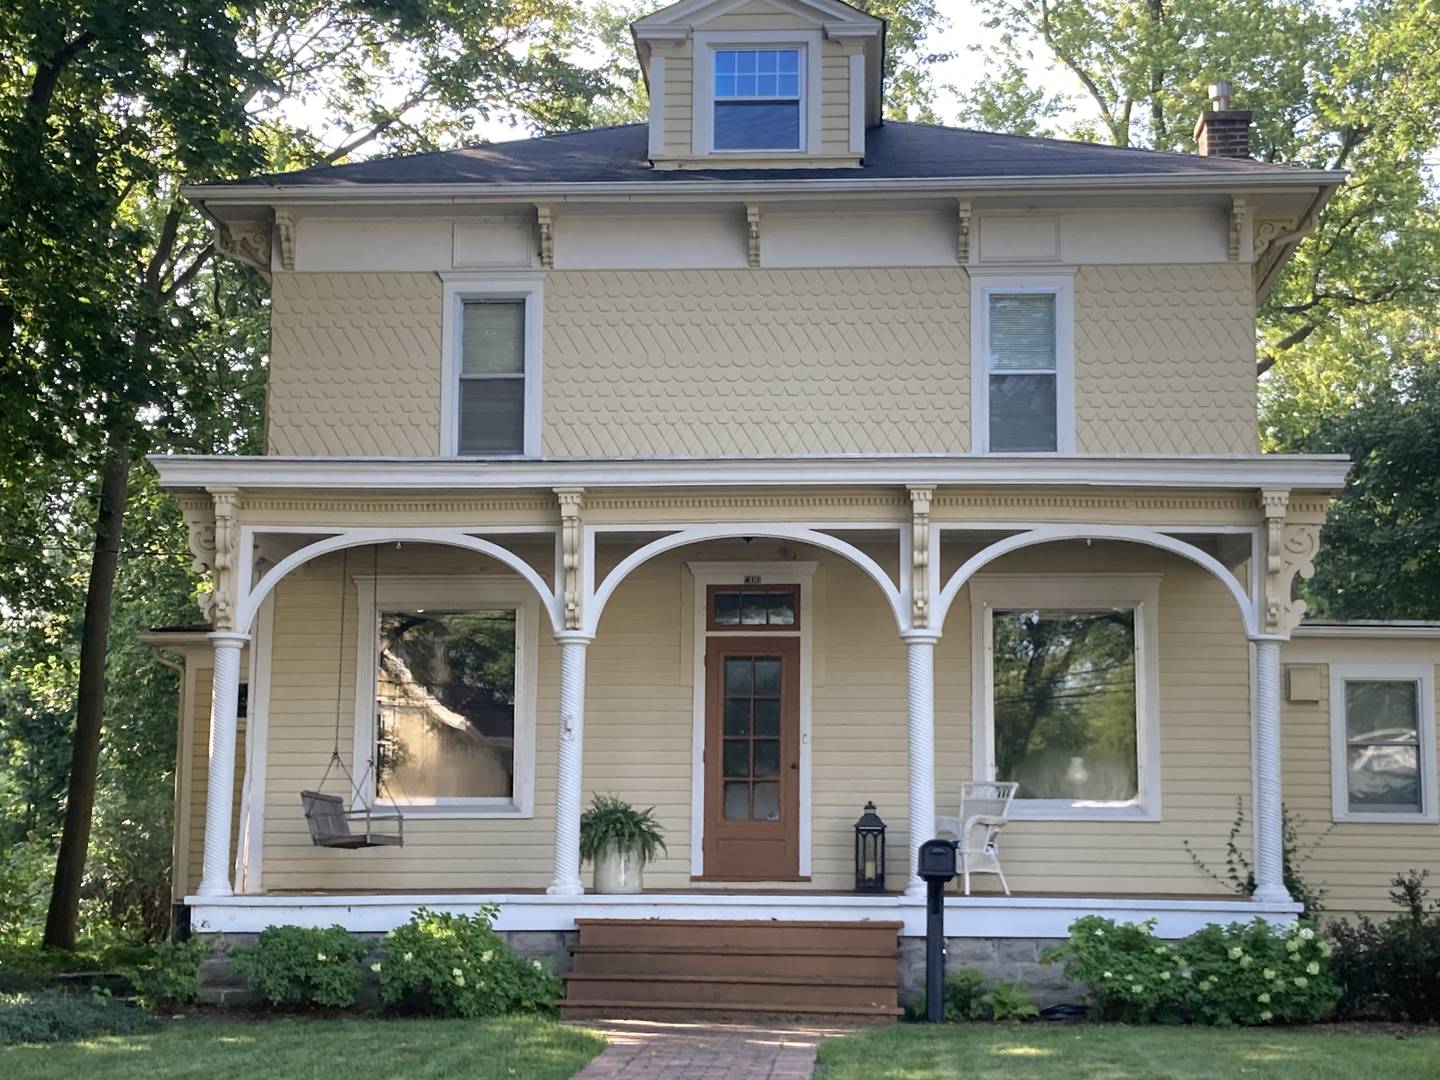 The wood spiral rope-patterned columns will be getting replaced on this1874 home at 411 Prairie St. with assistance from the St. Charles façade improvement grant.